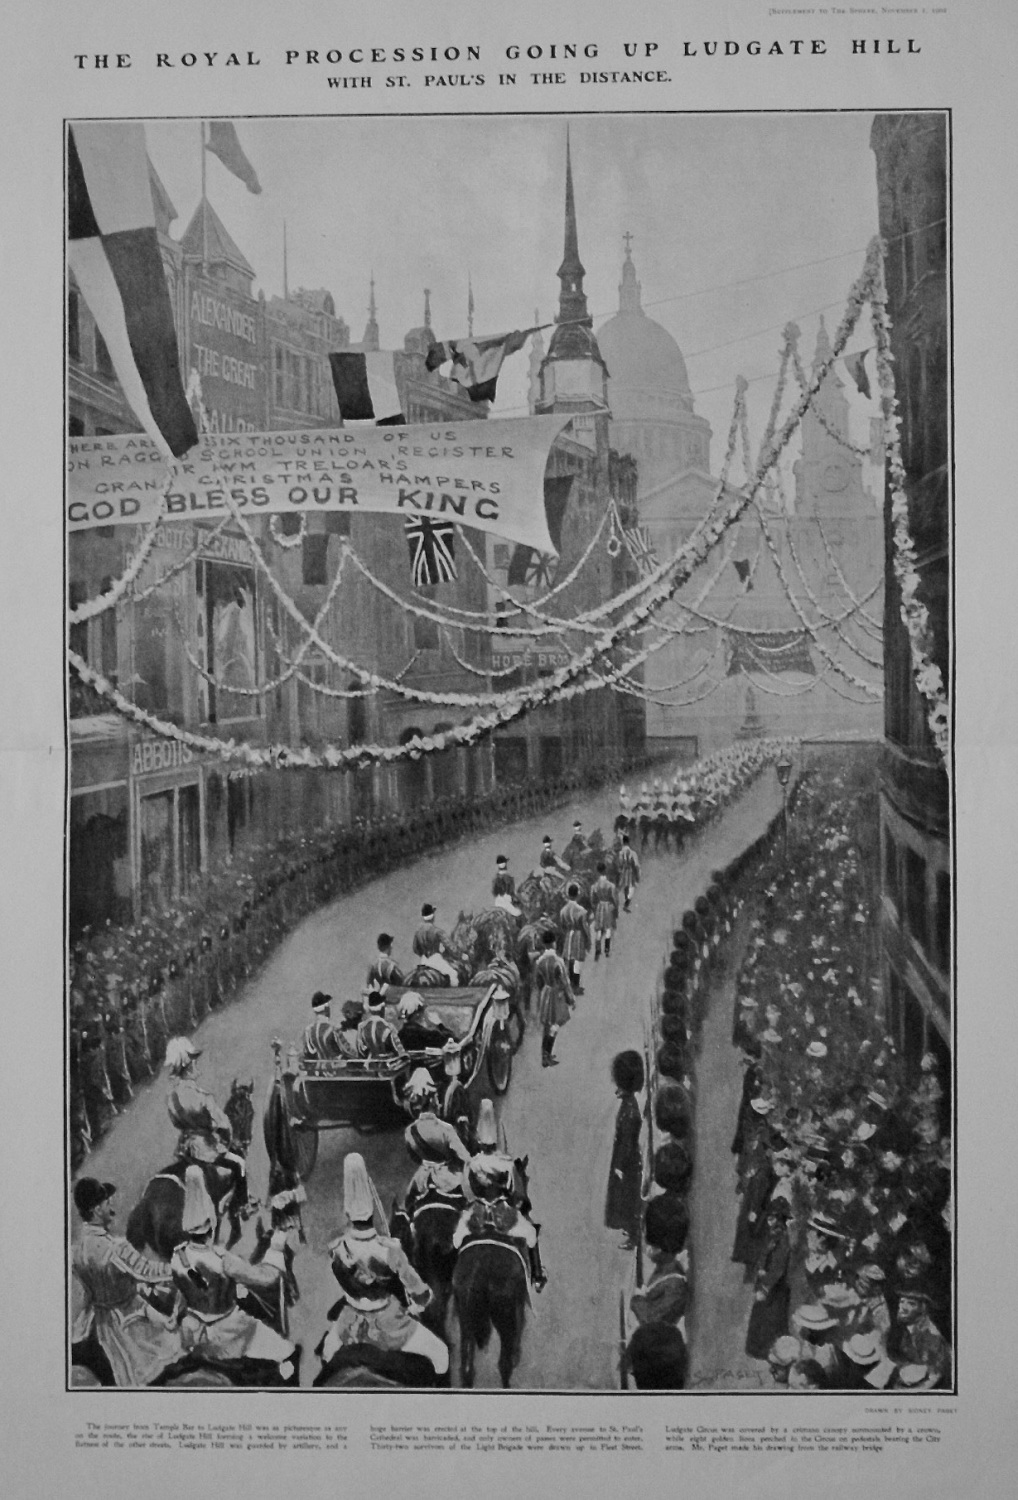 The Royal Procession Going Up Ludgate Hill, with St. Paul's in the Distance